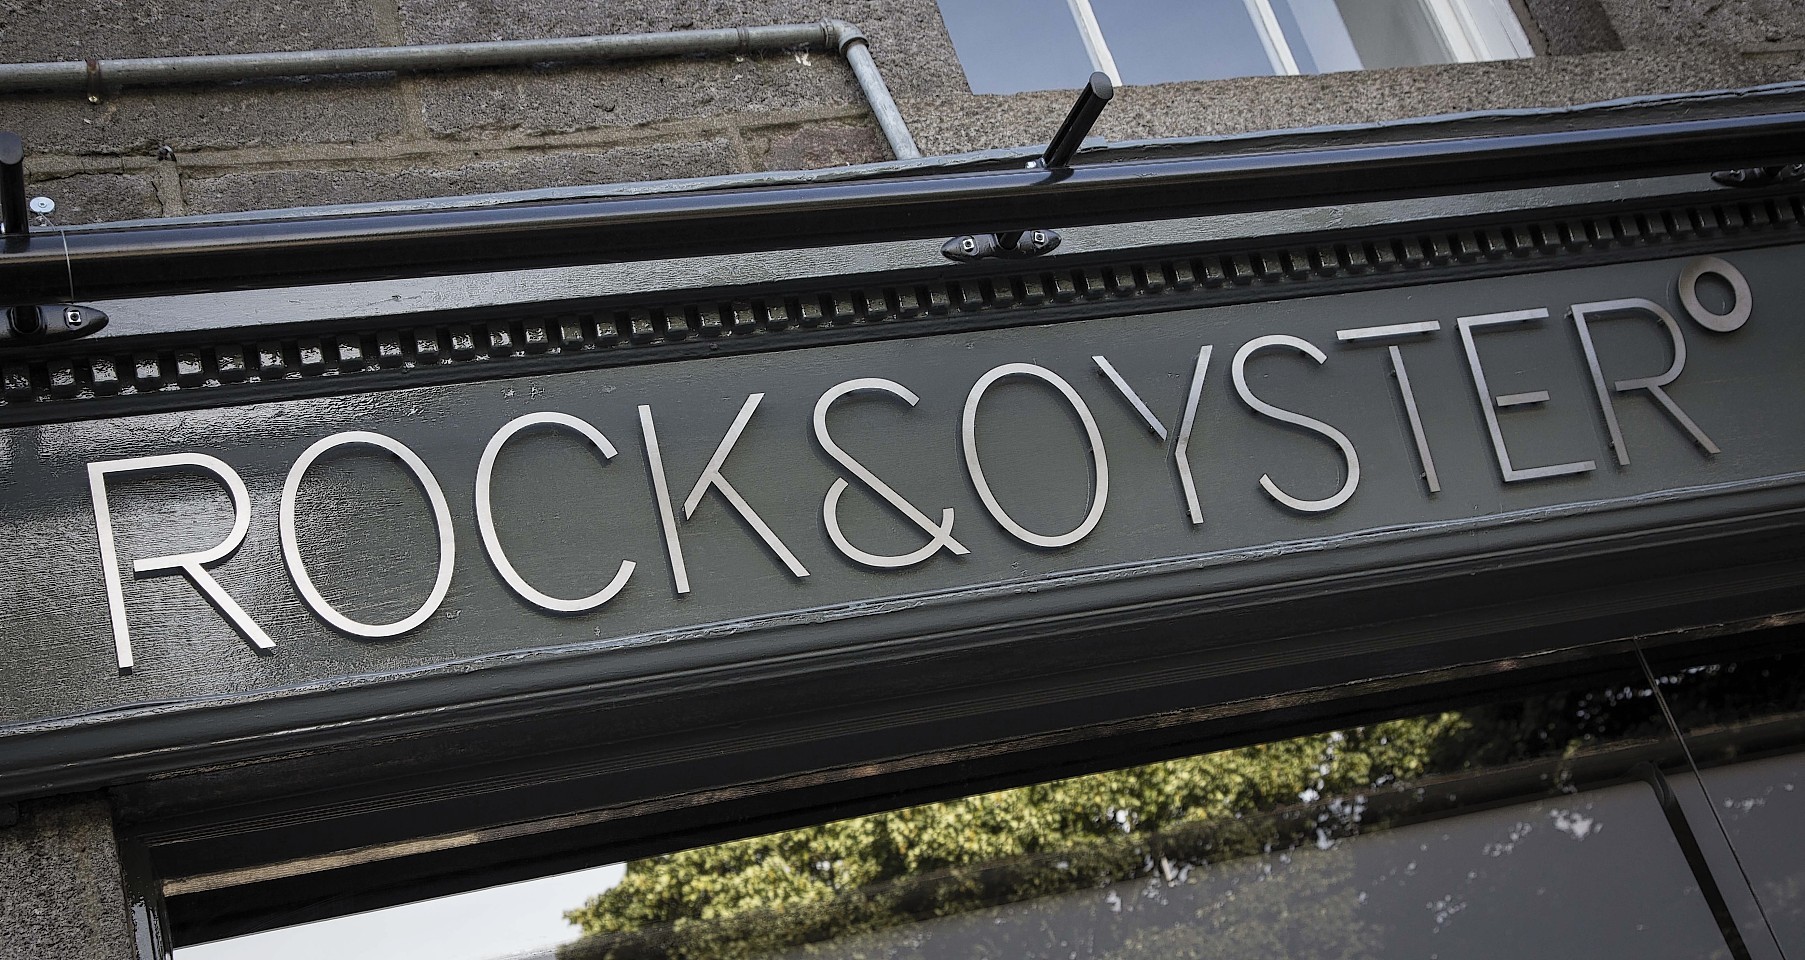 Rock  Oyster is one of dozens of fully booked restaurants in the Aberdeen 